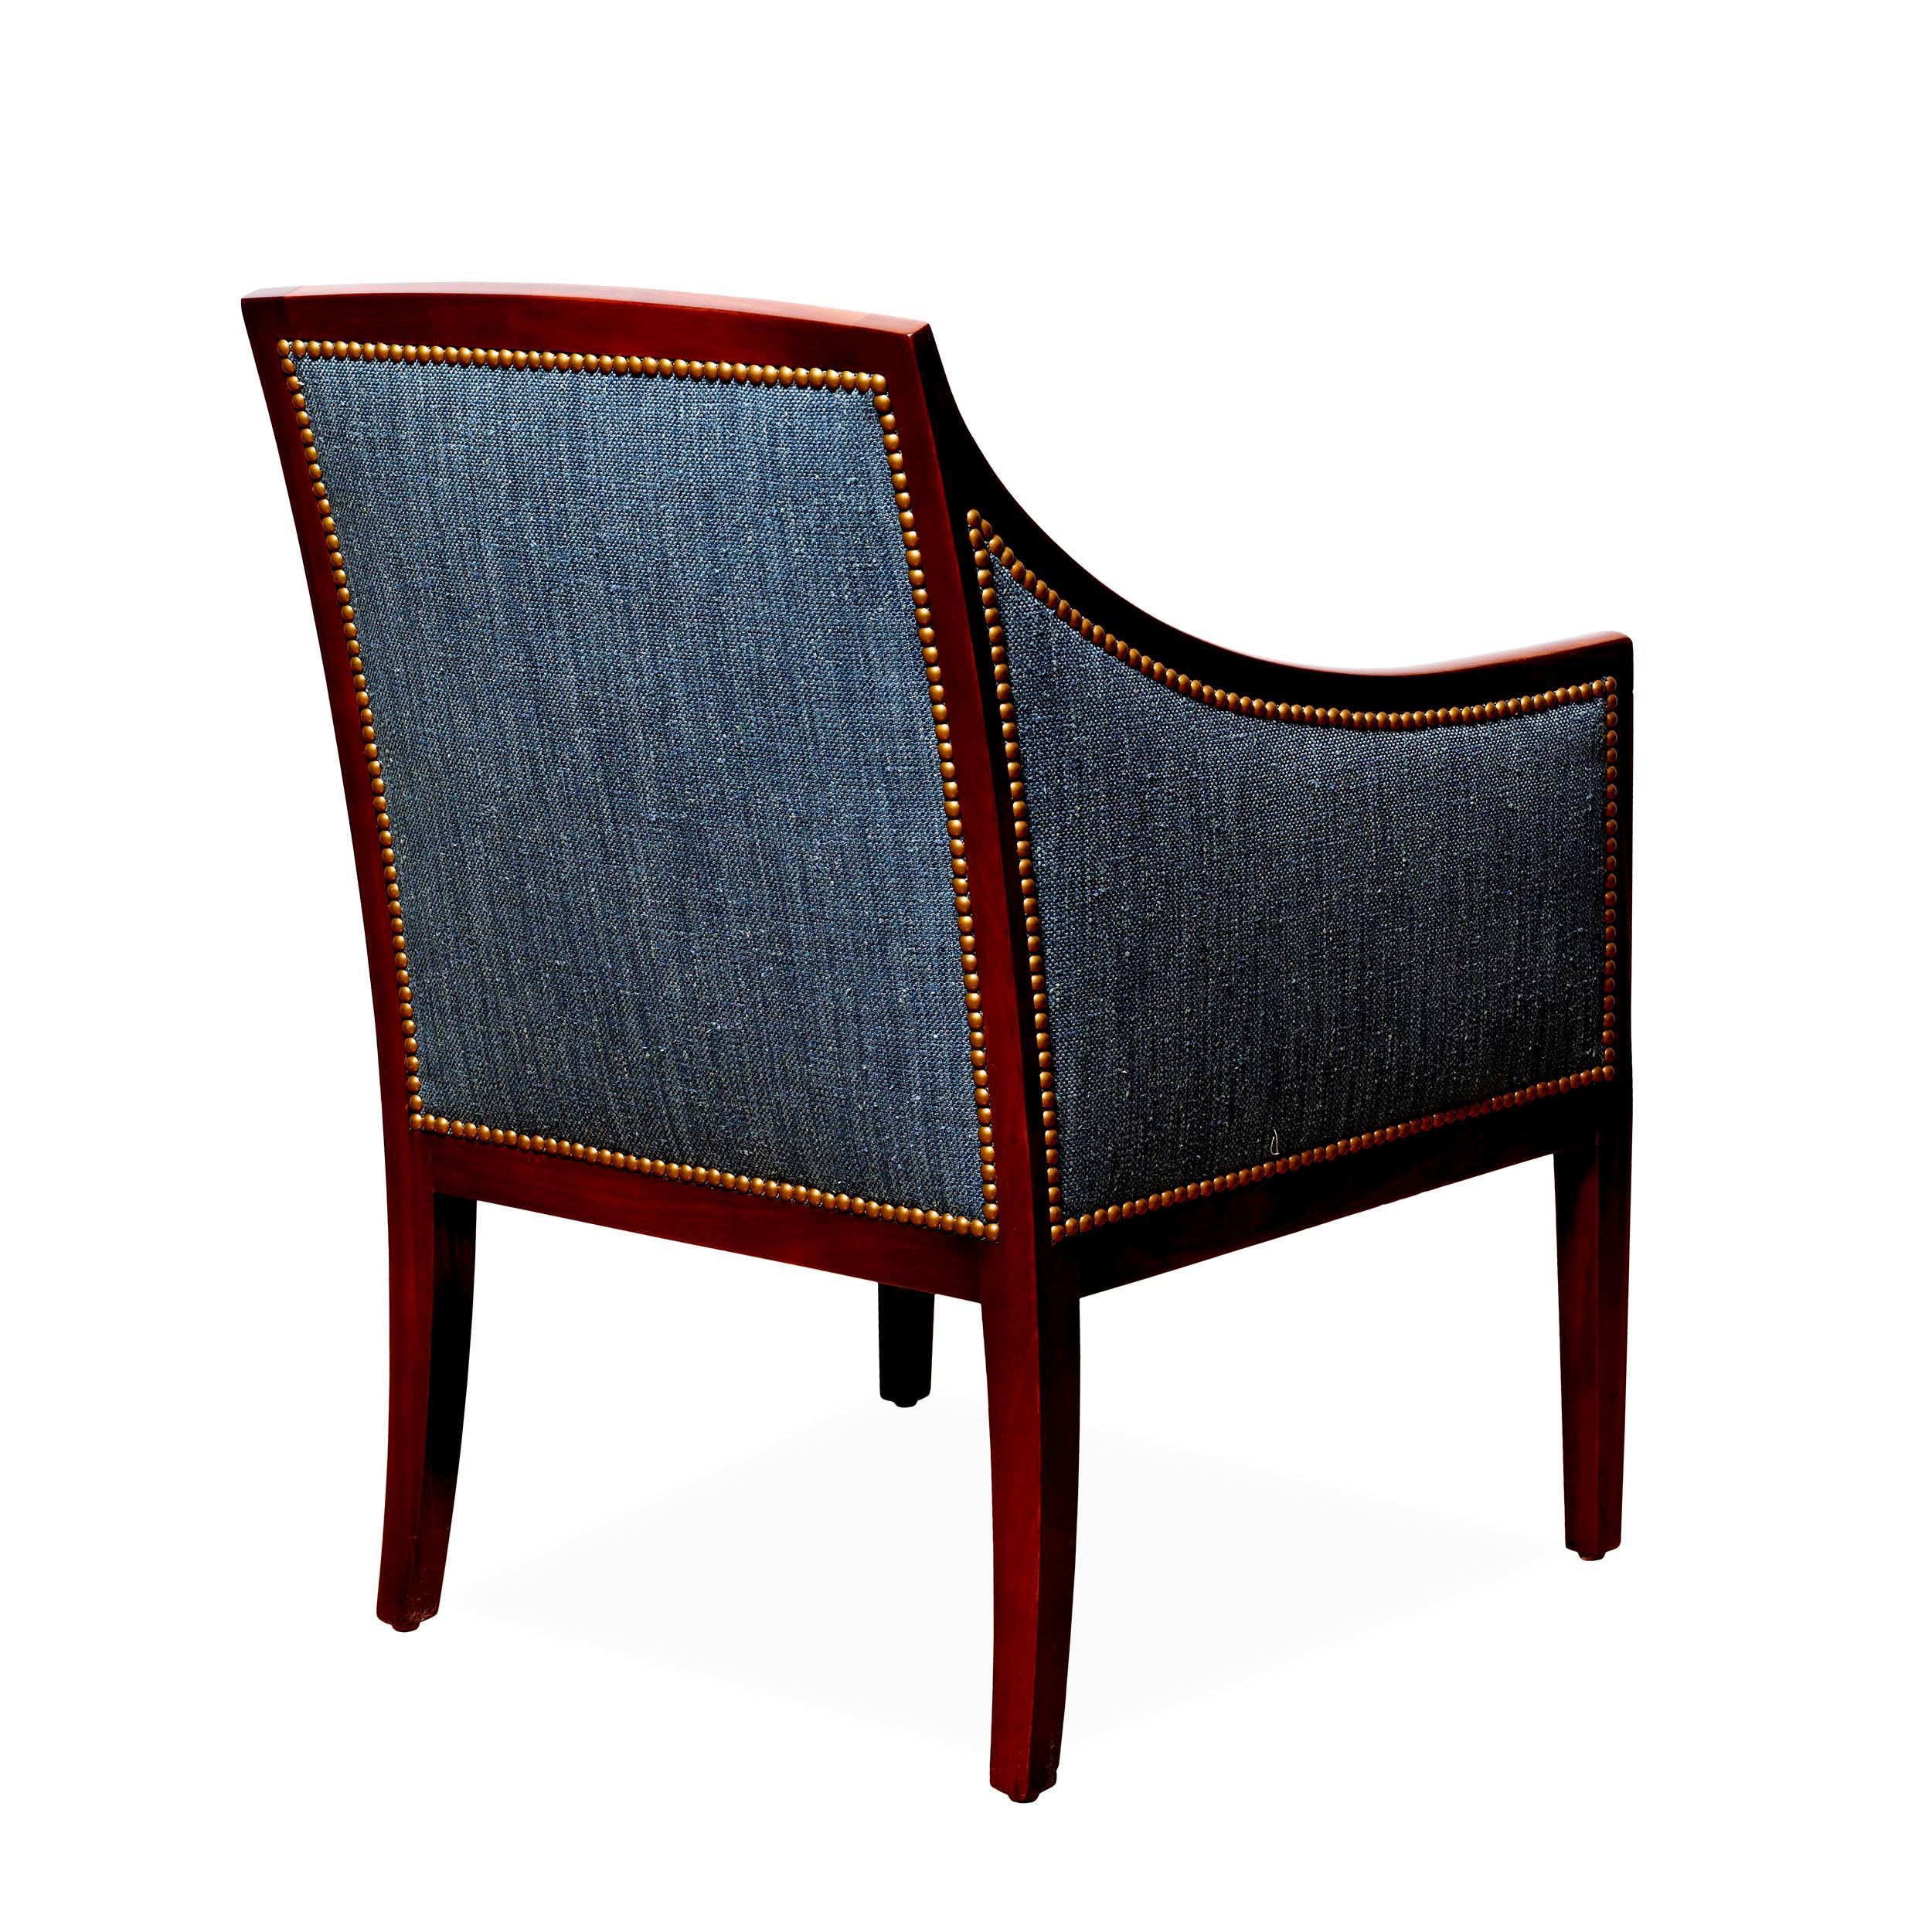 Art Deco Pair of Finely Modeled Armchairs Attributed to Jean-Michel Frank For Sale